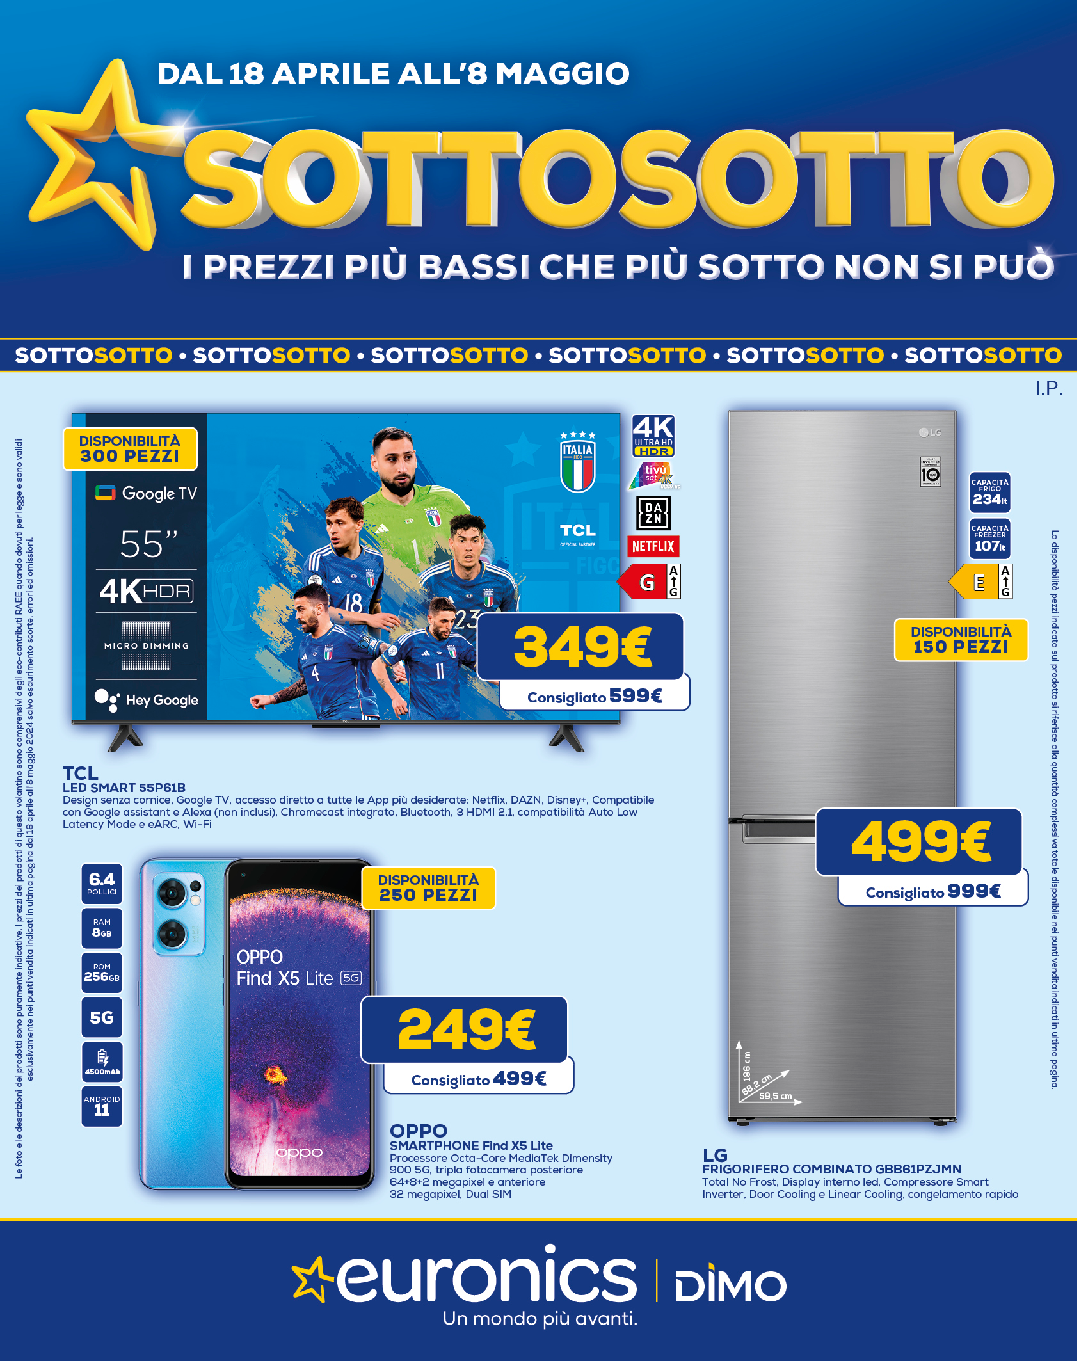 SOTTOSOTTO